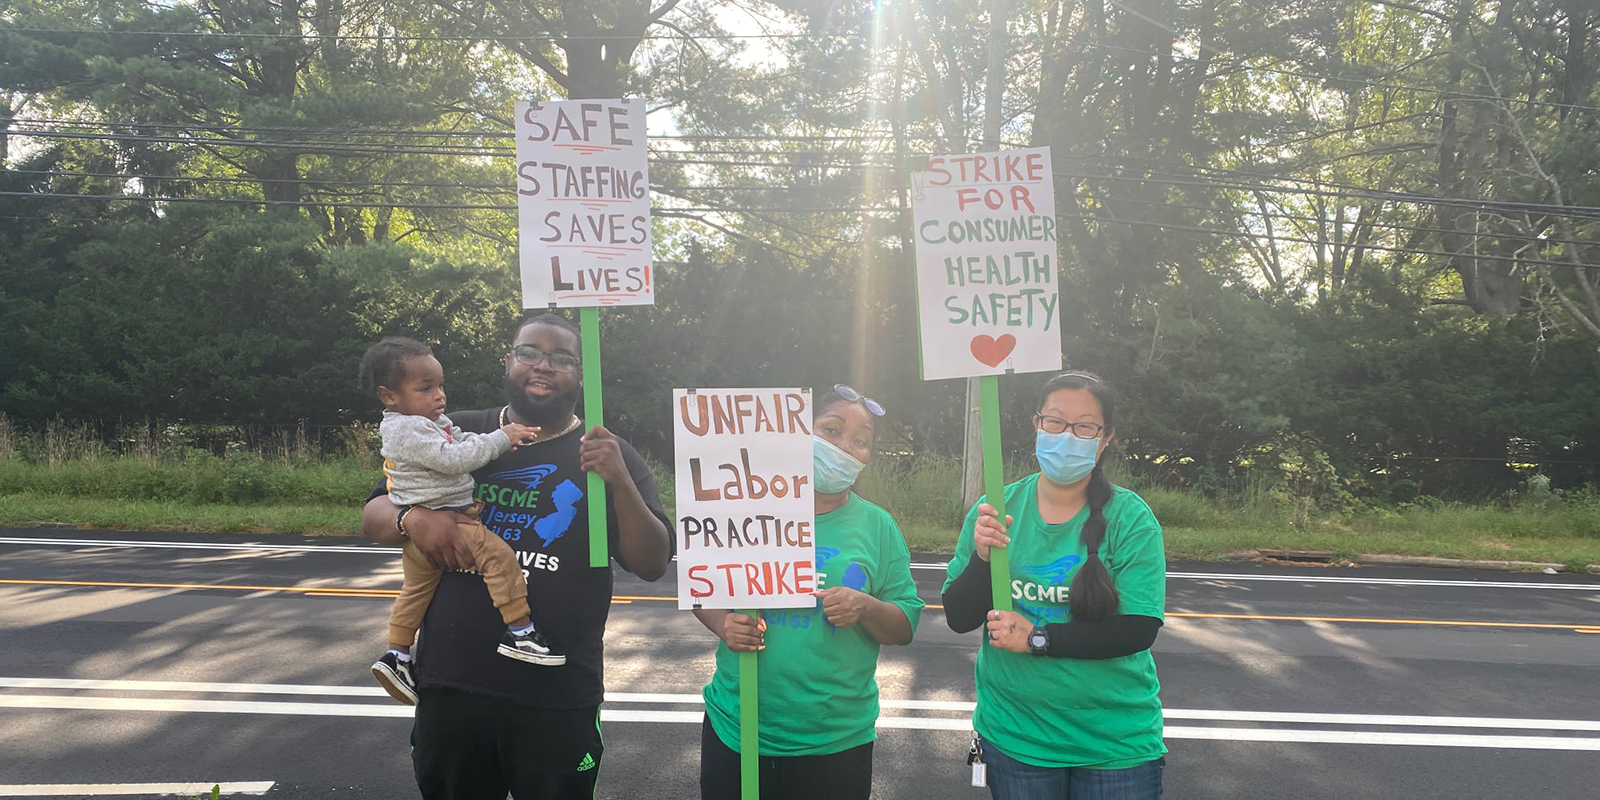 New Jersey behavioral health workers held Labor Day strike